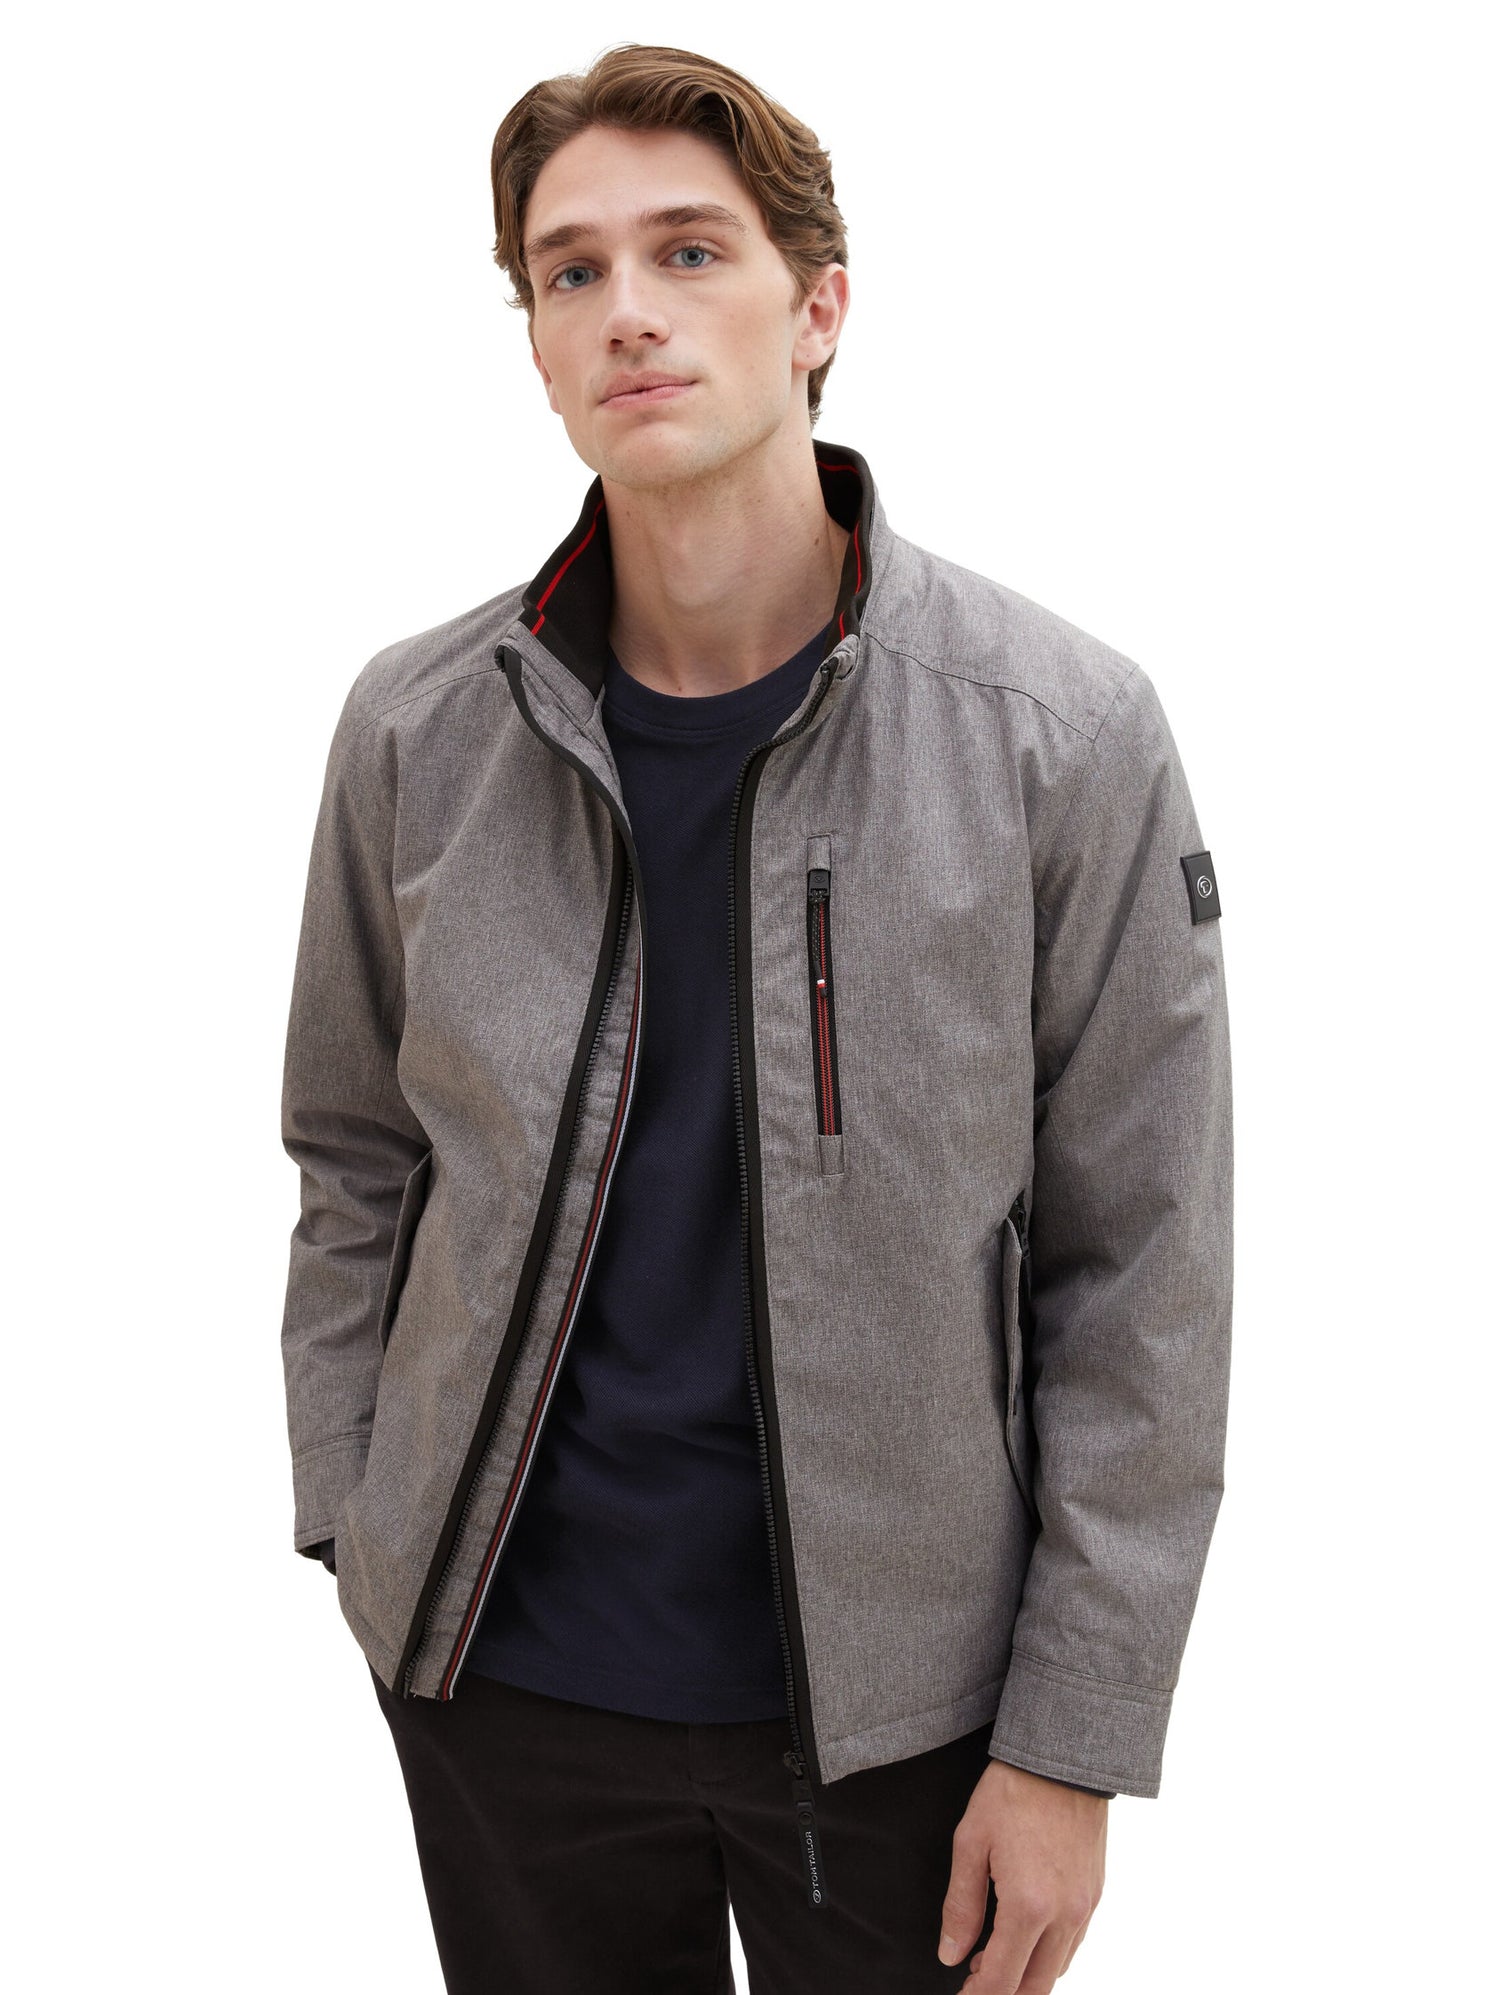 Padded Jacket With Multiple Pockets_1037331_18960_02